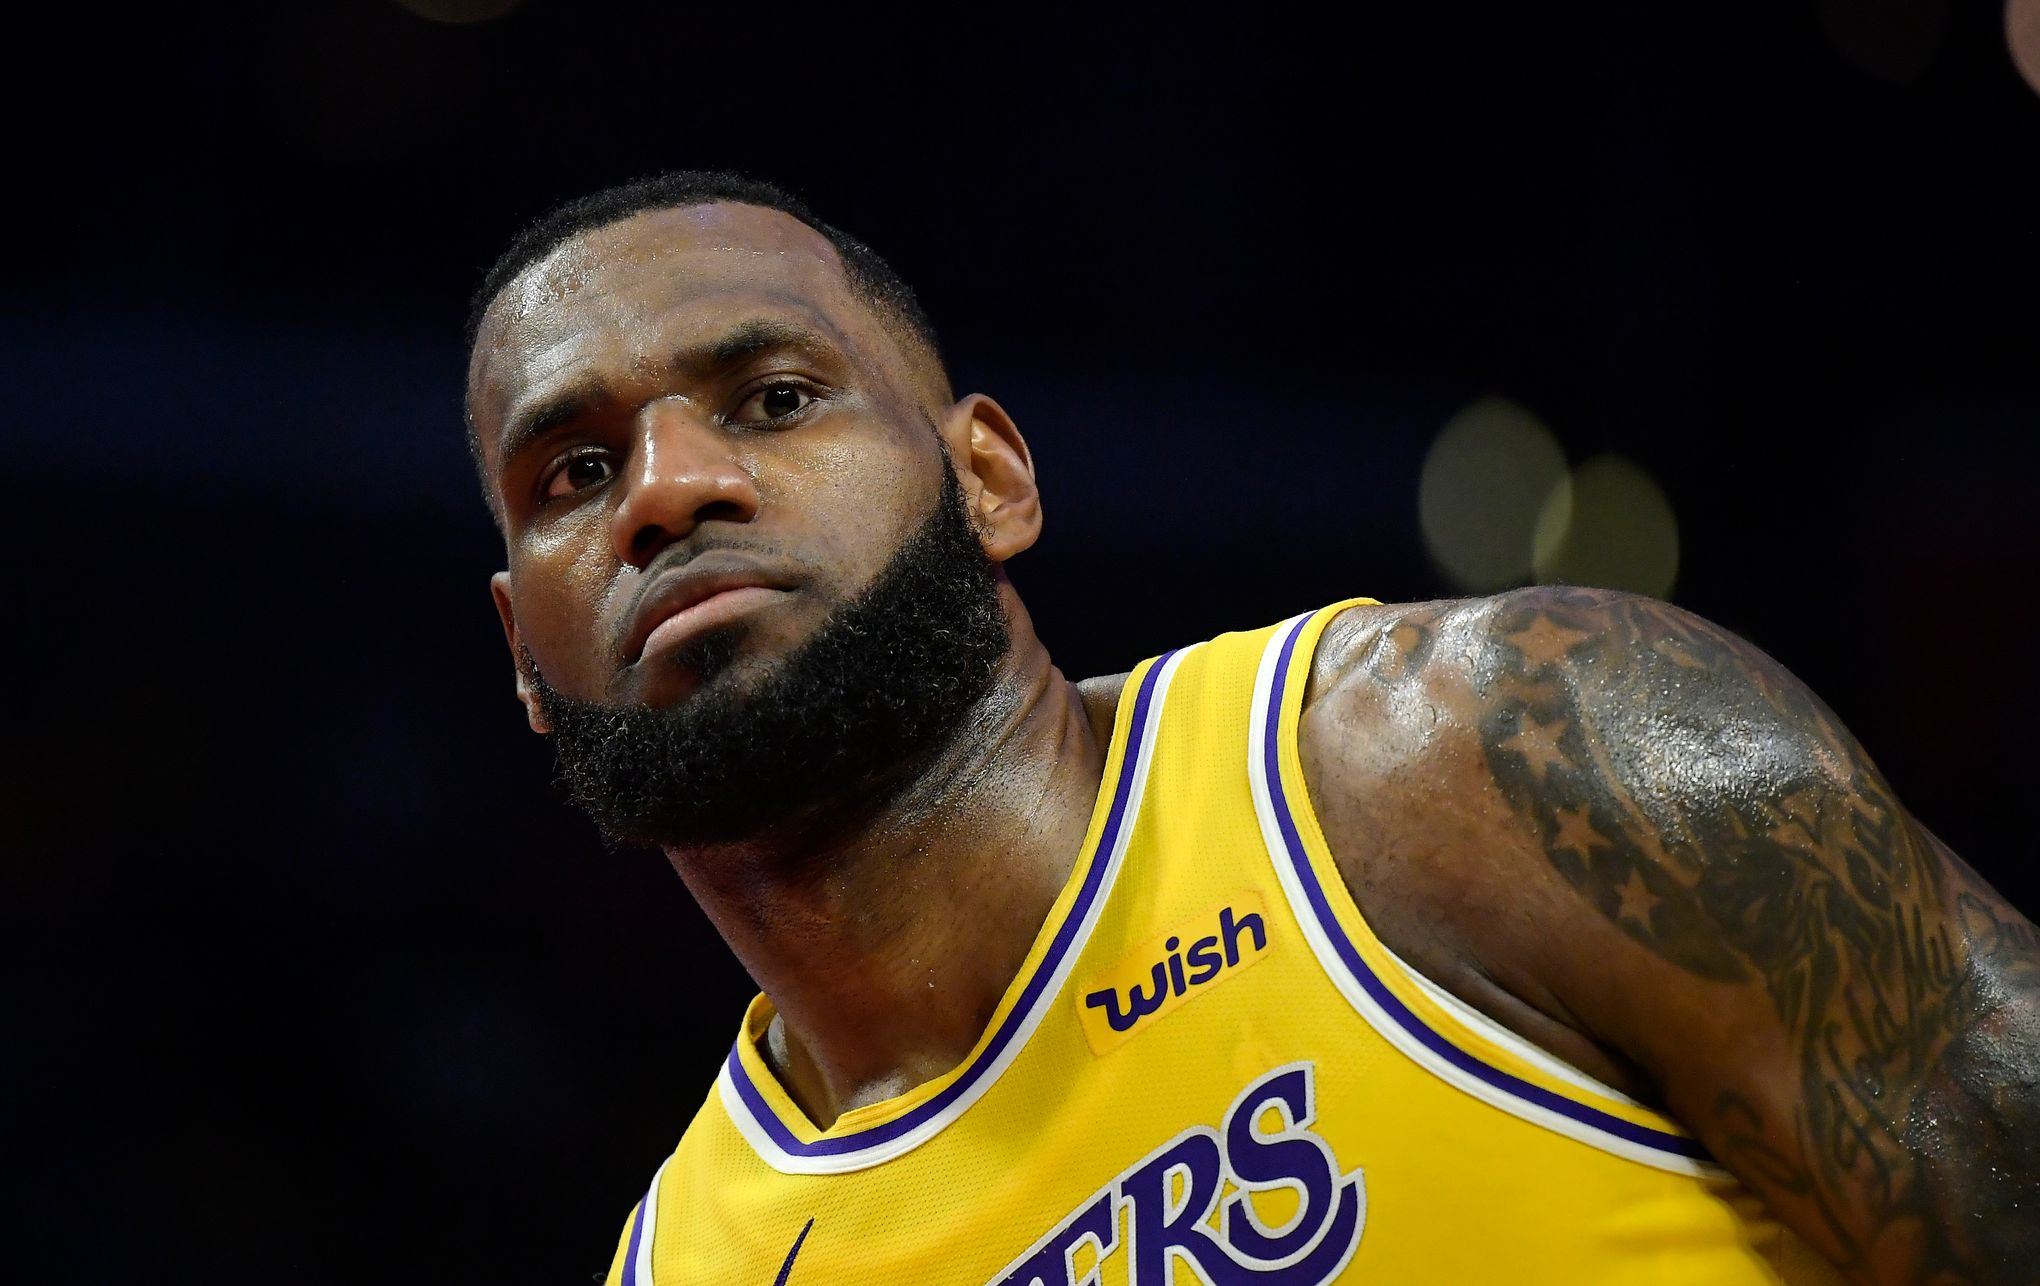 LeBron James' tattoo artist moves forward in lawsuit against NBA